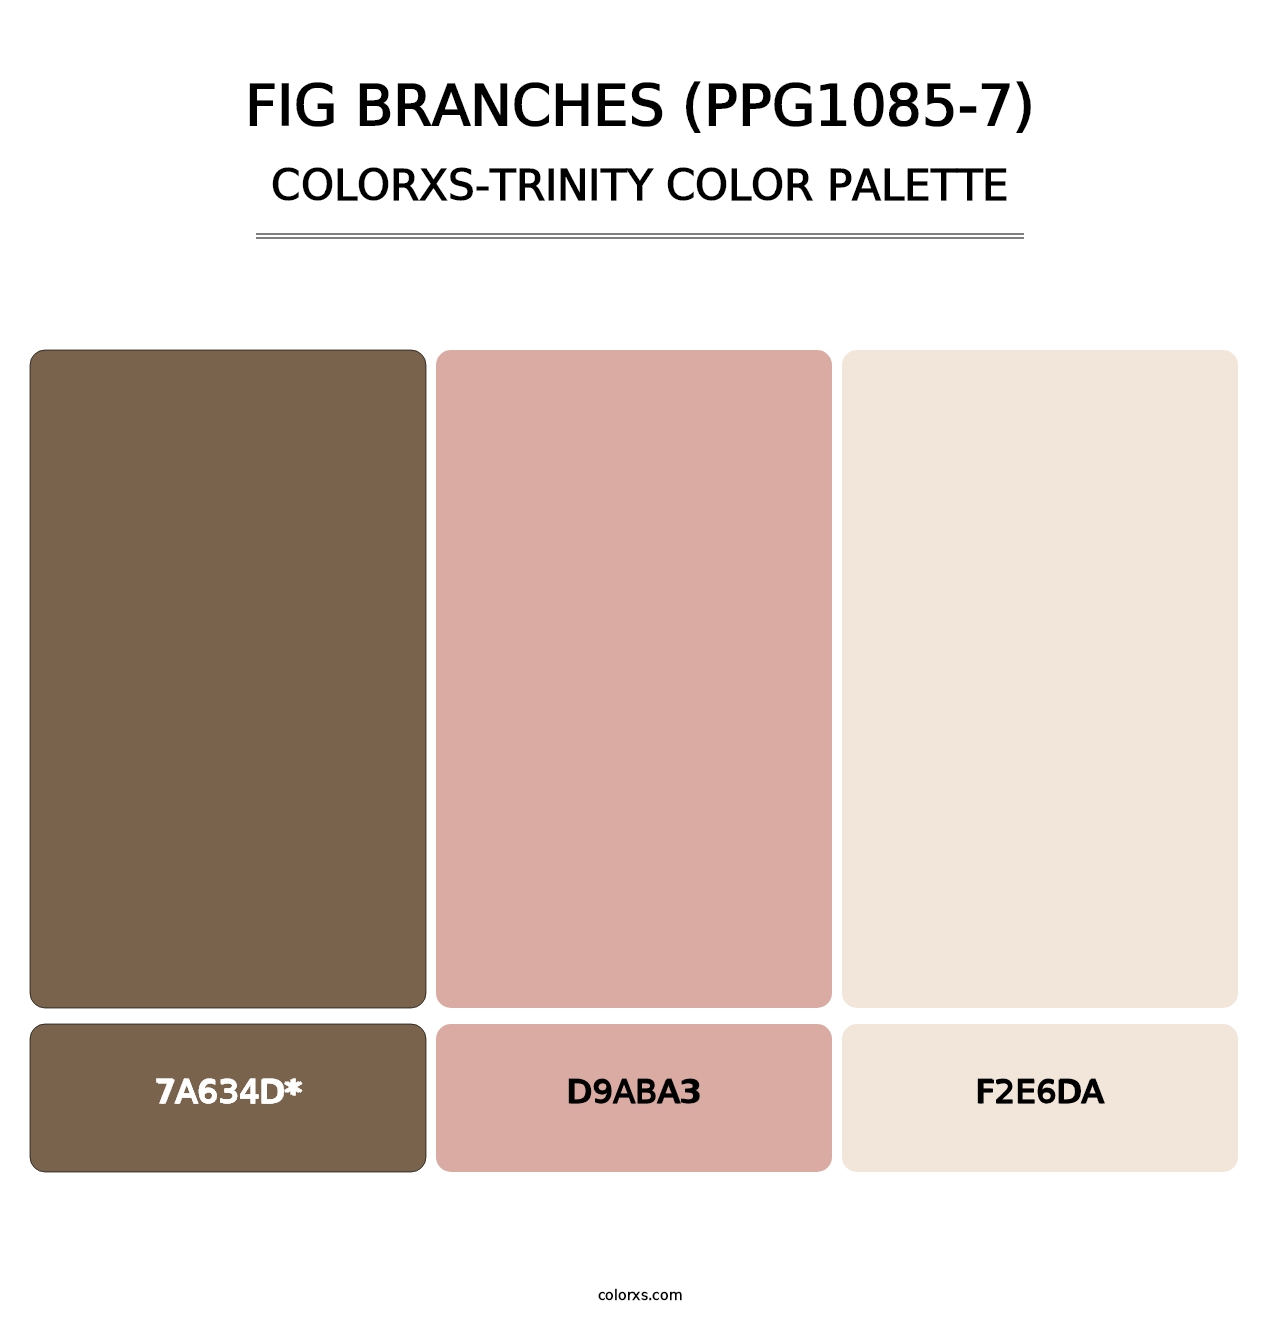 Fig Branches (PPG1085-7) - Colorxs Trinity Palette